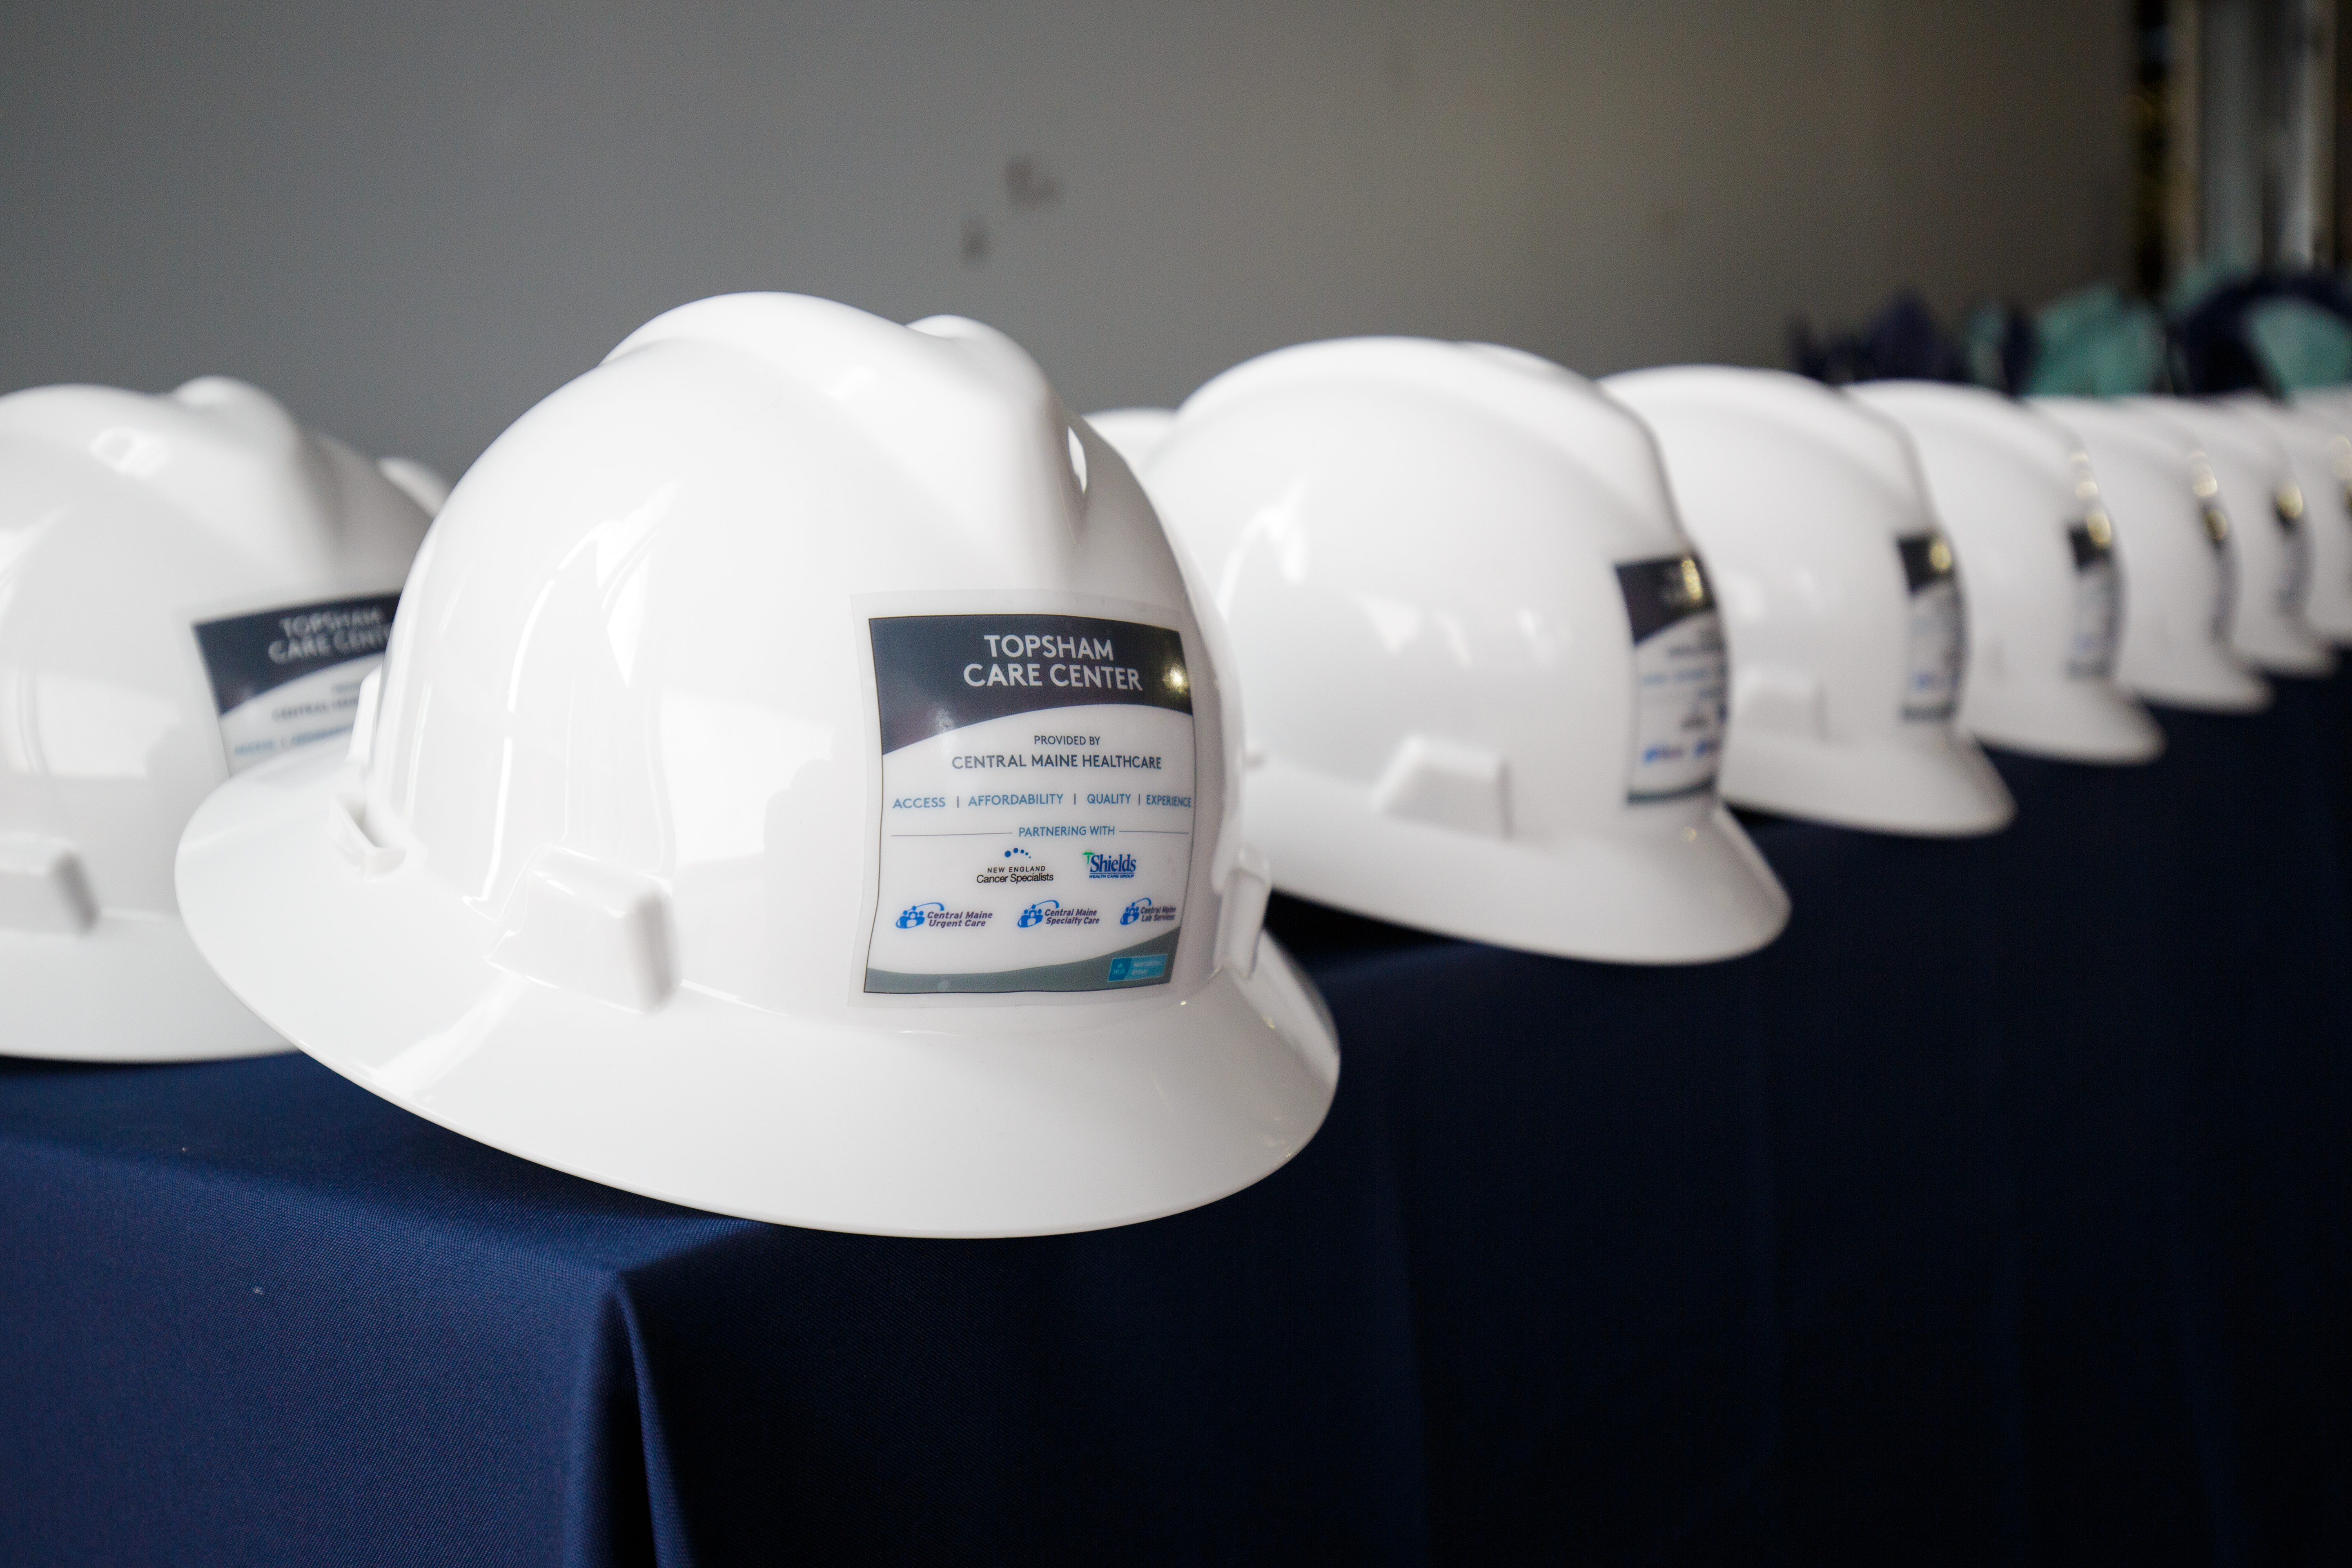 New England Cancer Specialists hard hats